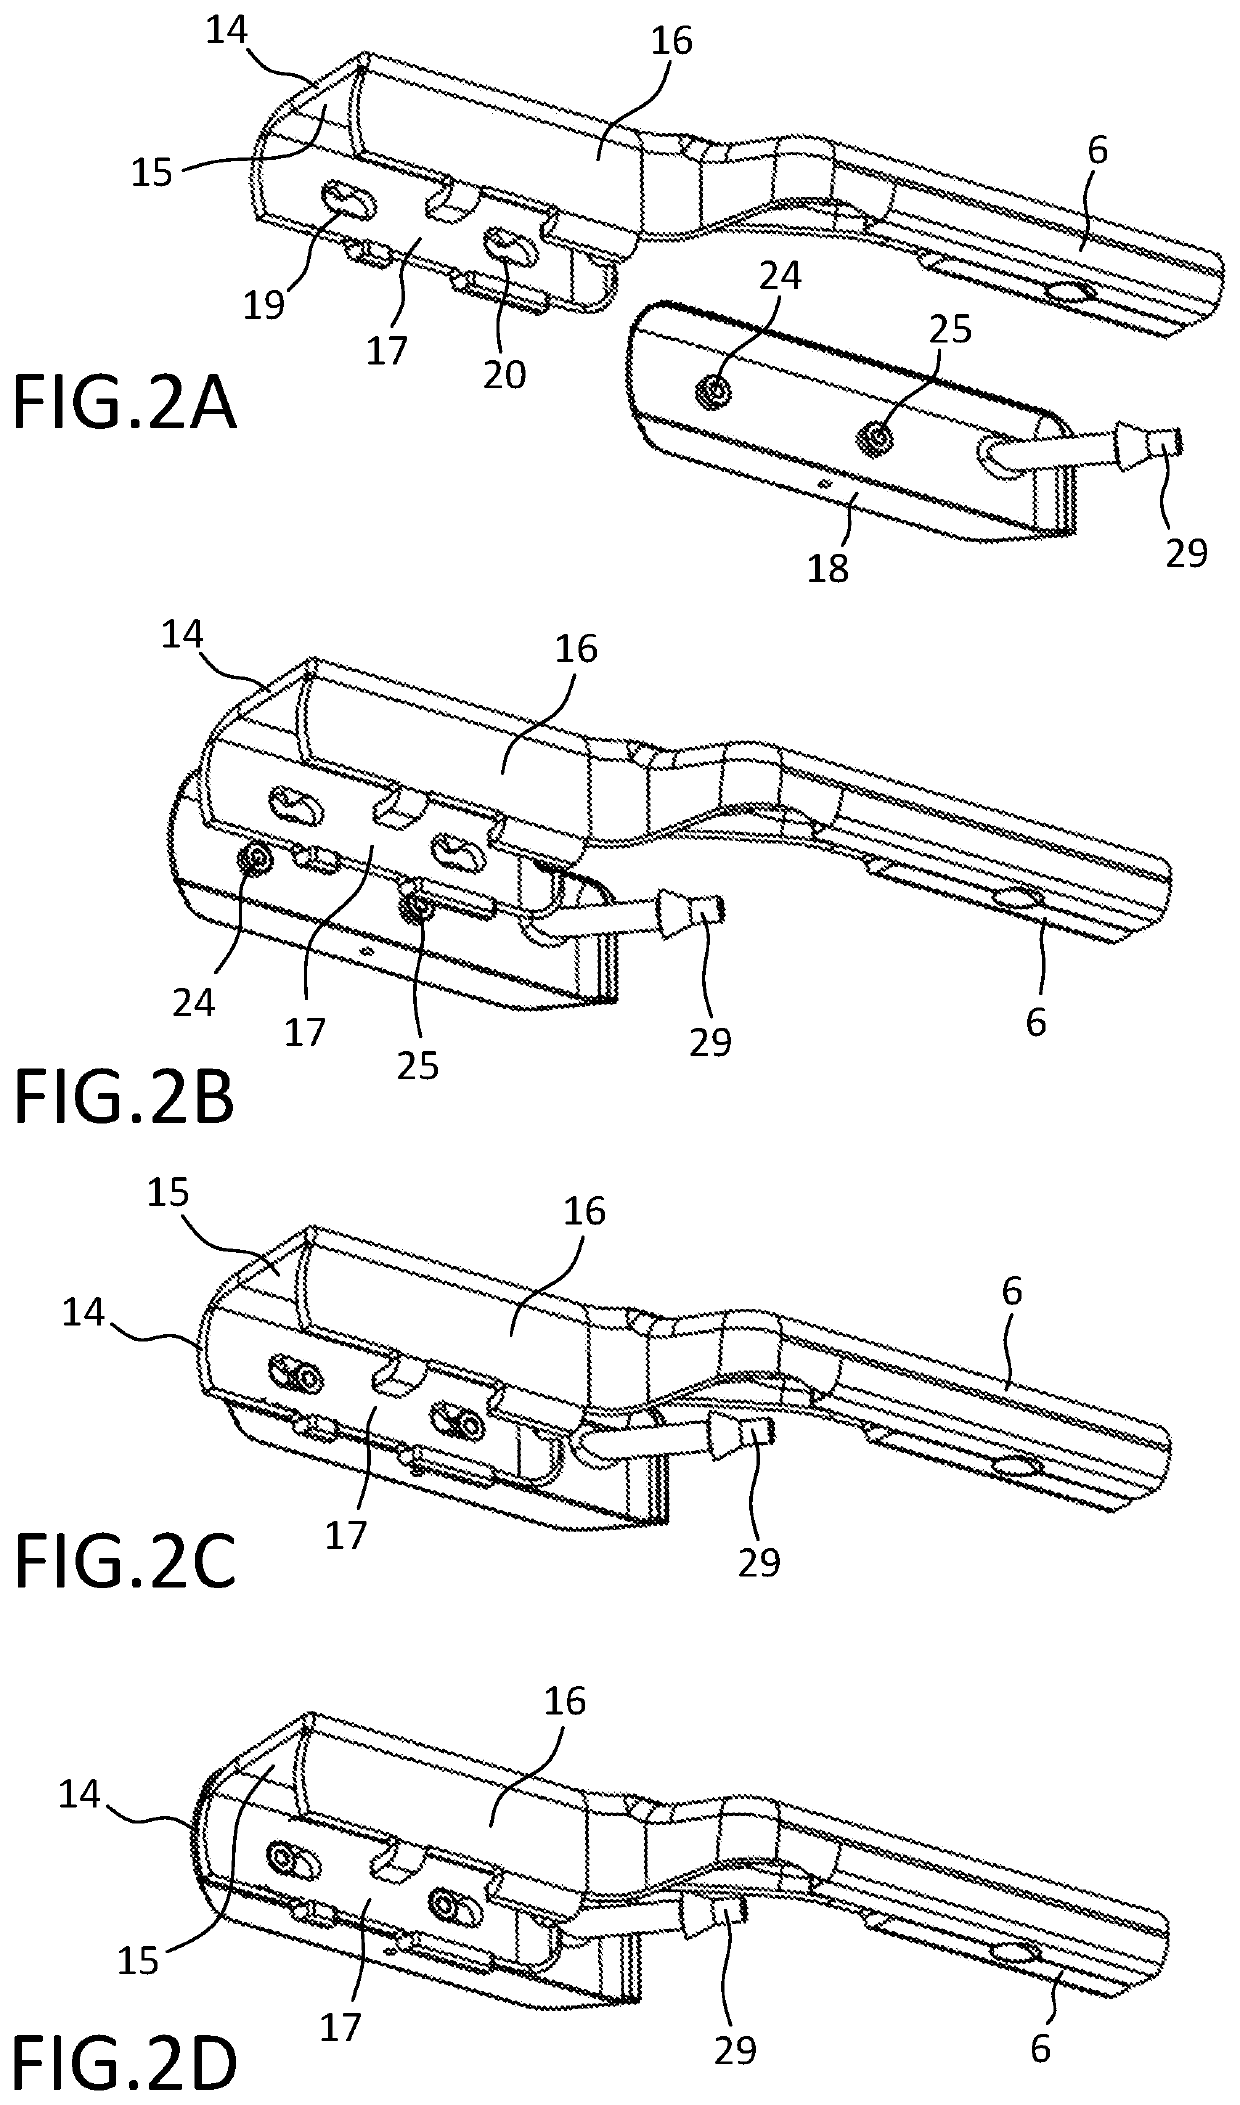 Windscreen wiper arm, particularly for automobiles